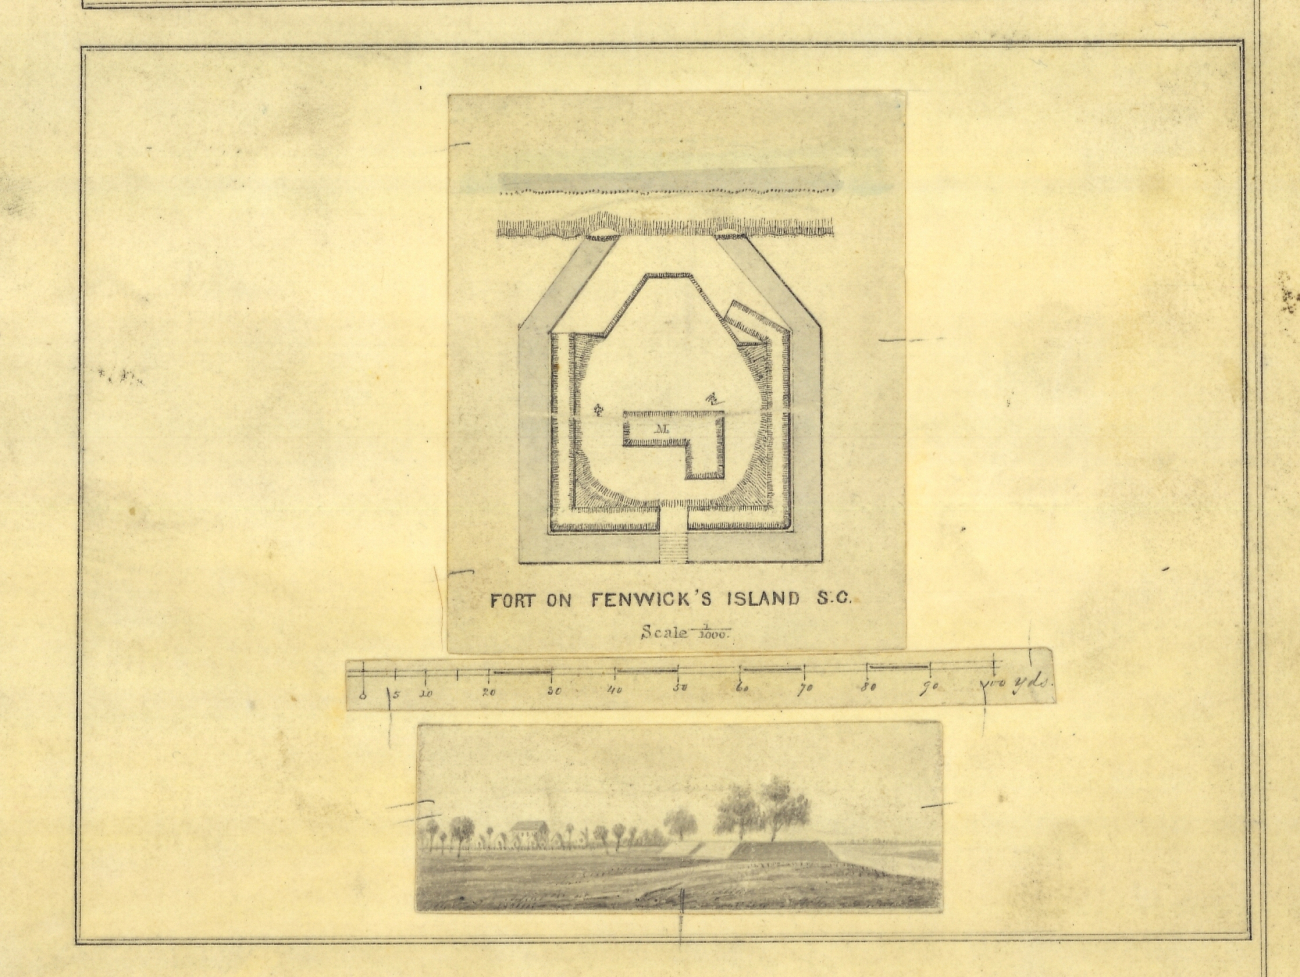 Blowup view of Fort on Fenwick's Island, S